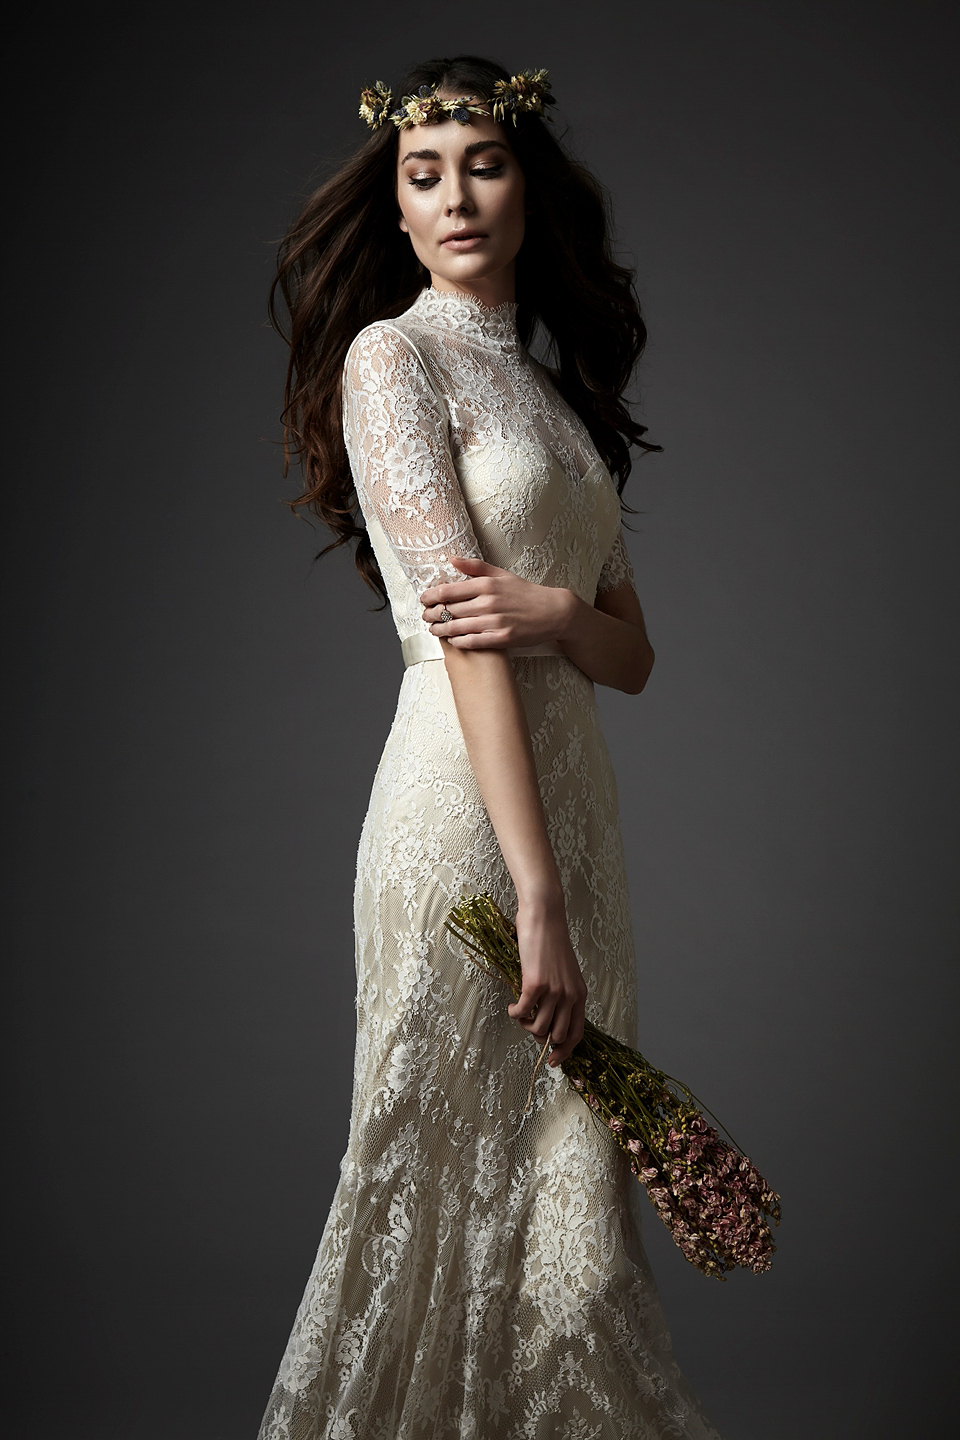 In interview with bridal fashion designer Catherine Deane.